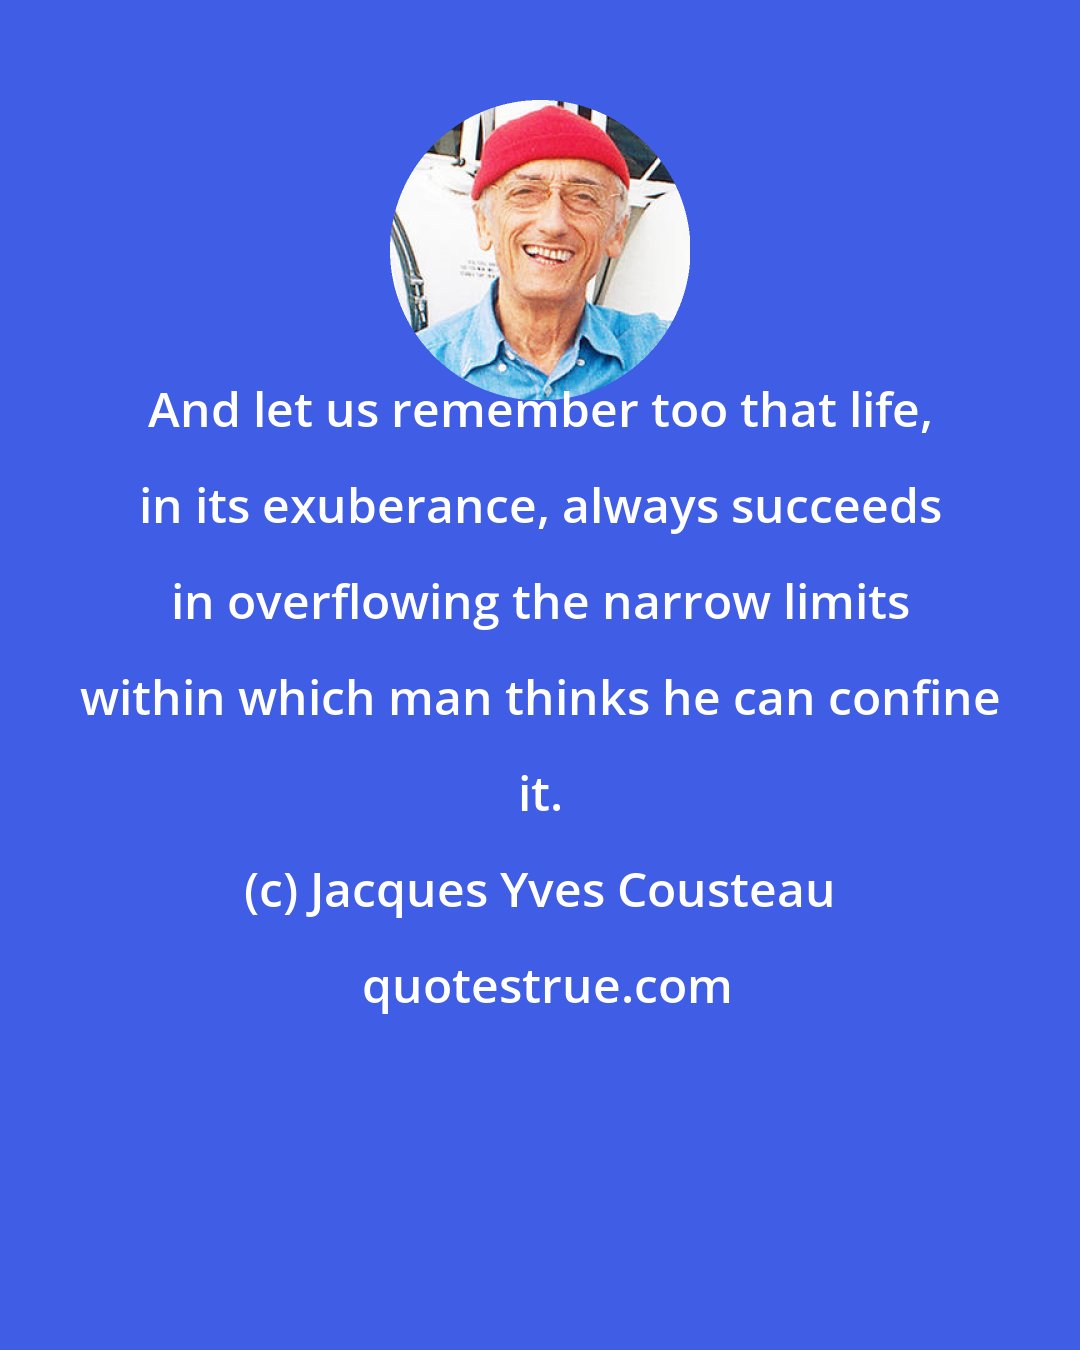 Jacques Yves Cousteau: And let us remember too that life, in its exuberance, always succeeds in overflowing the narrow limits within which man thinks he can confine it.